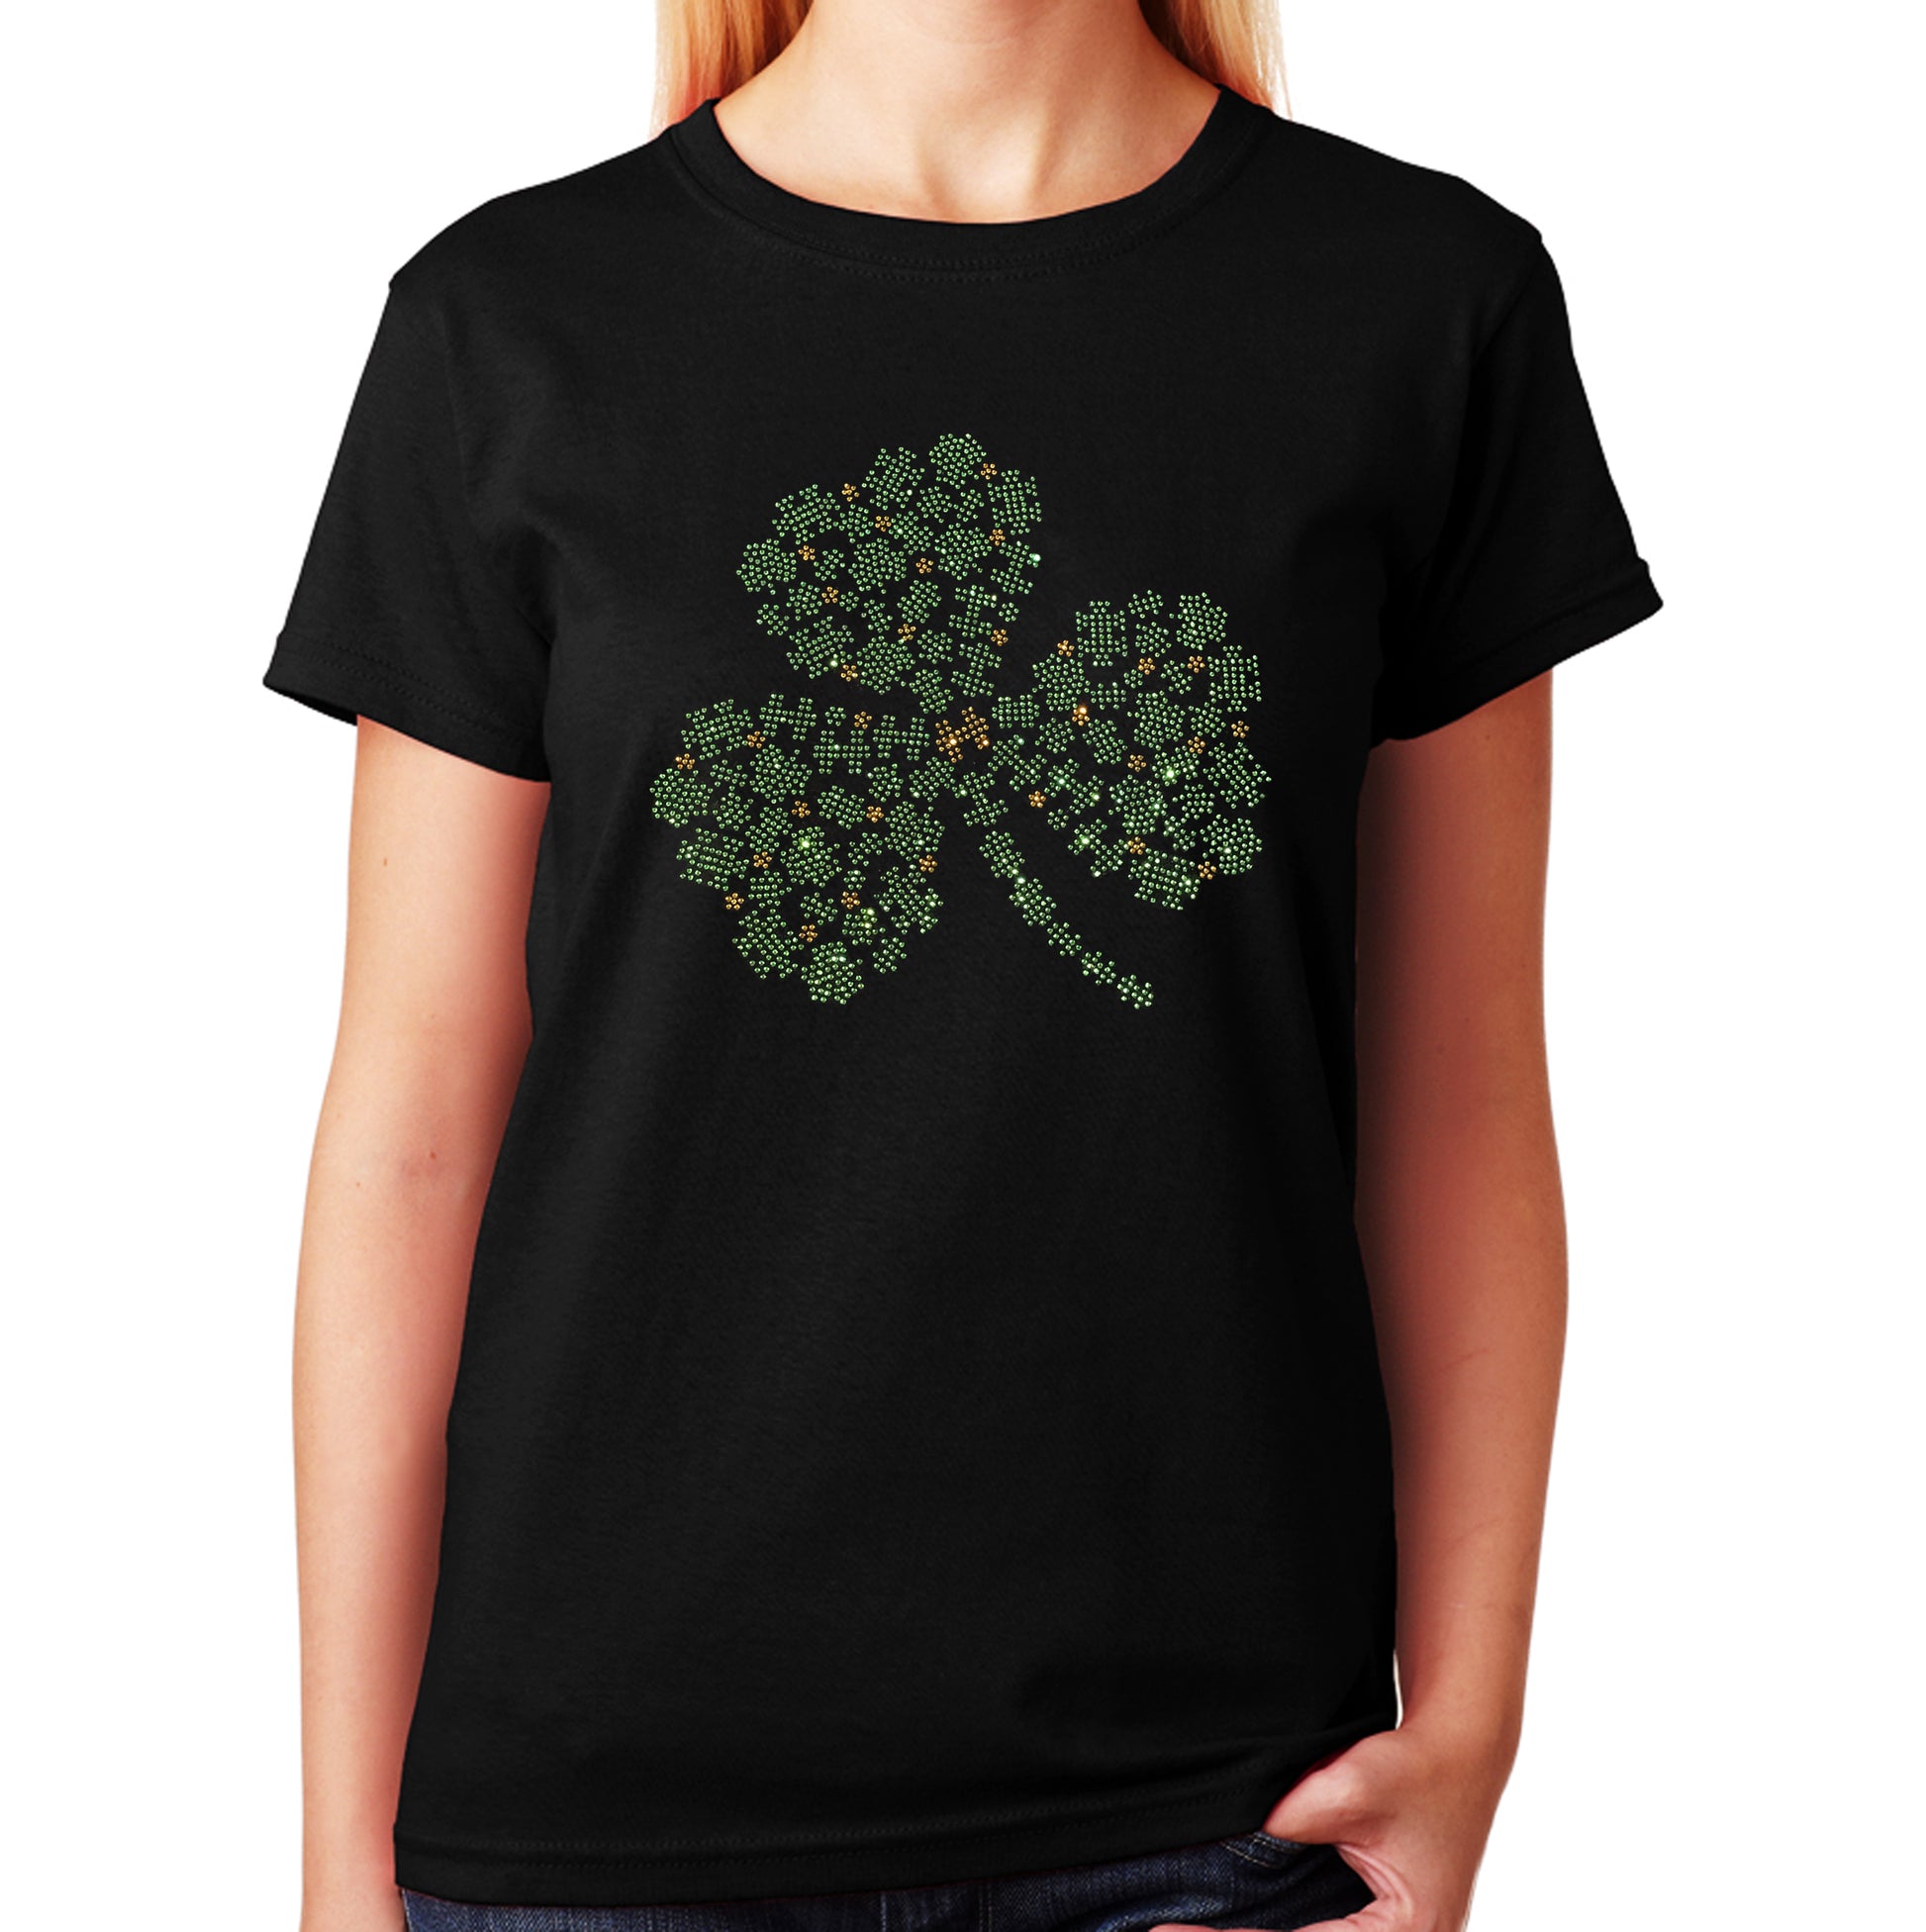 Women's / Unisex T-Shirt with St Patrick's Clover Collage in Rhinestones